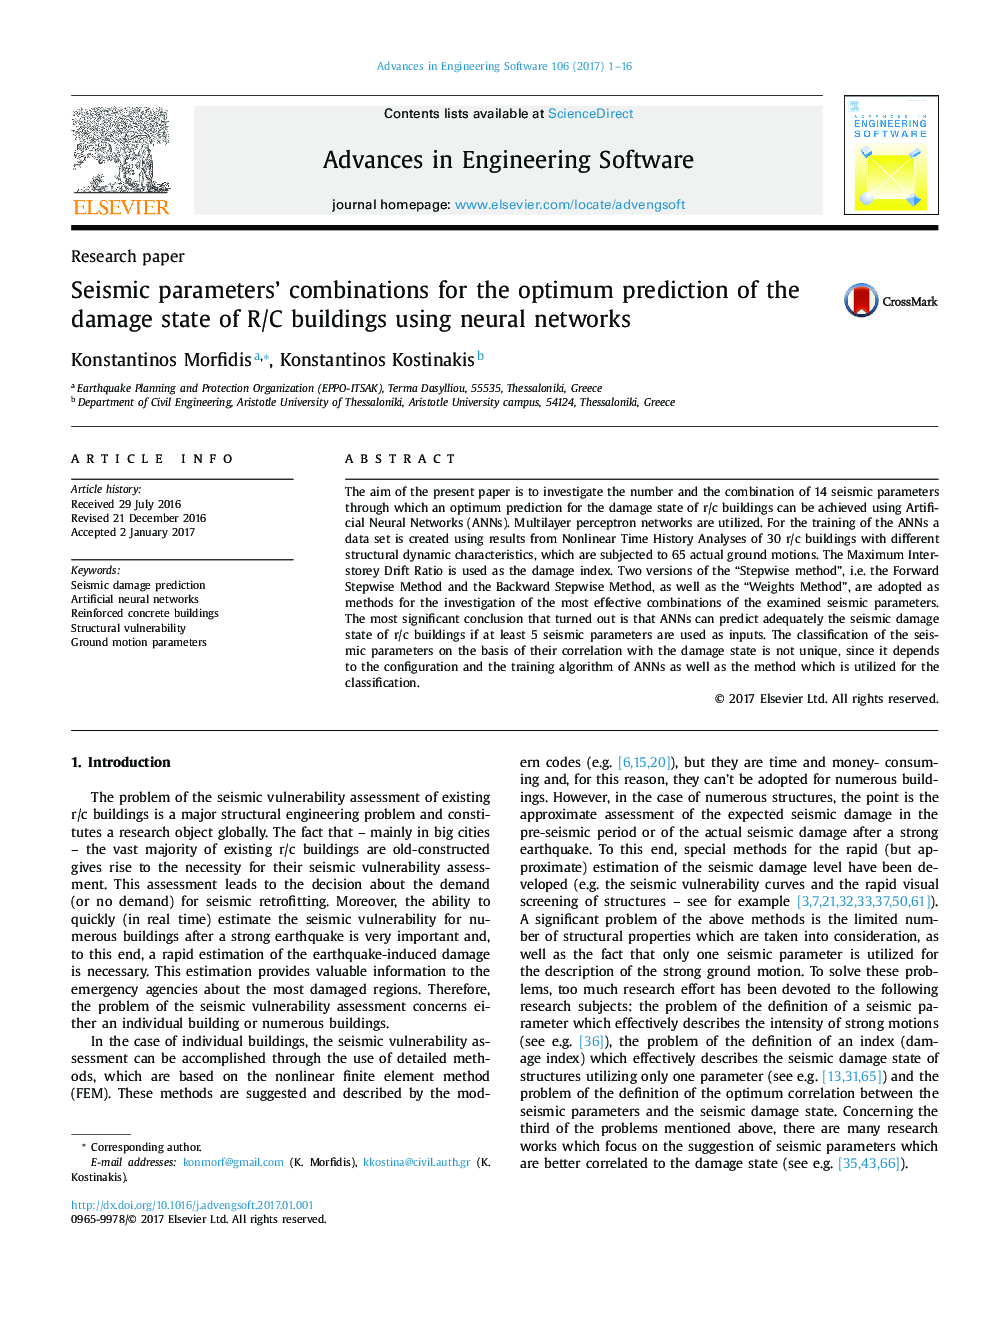 Seismic parameters' combinations for the optimum prediction of the damage state of R/C buildings using neural networks